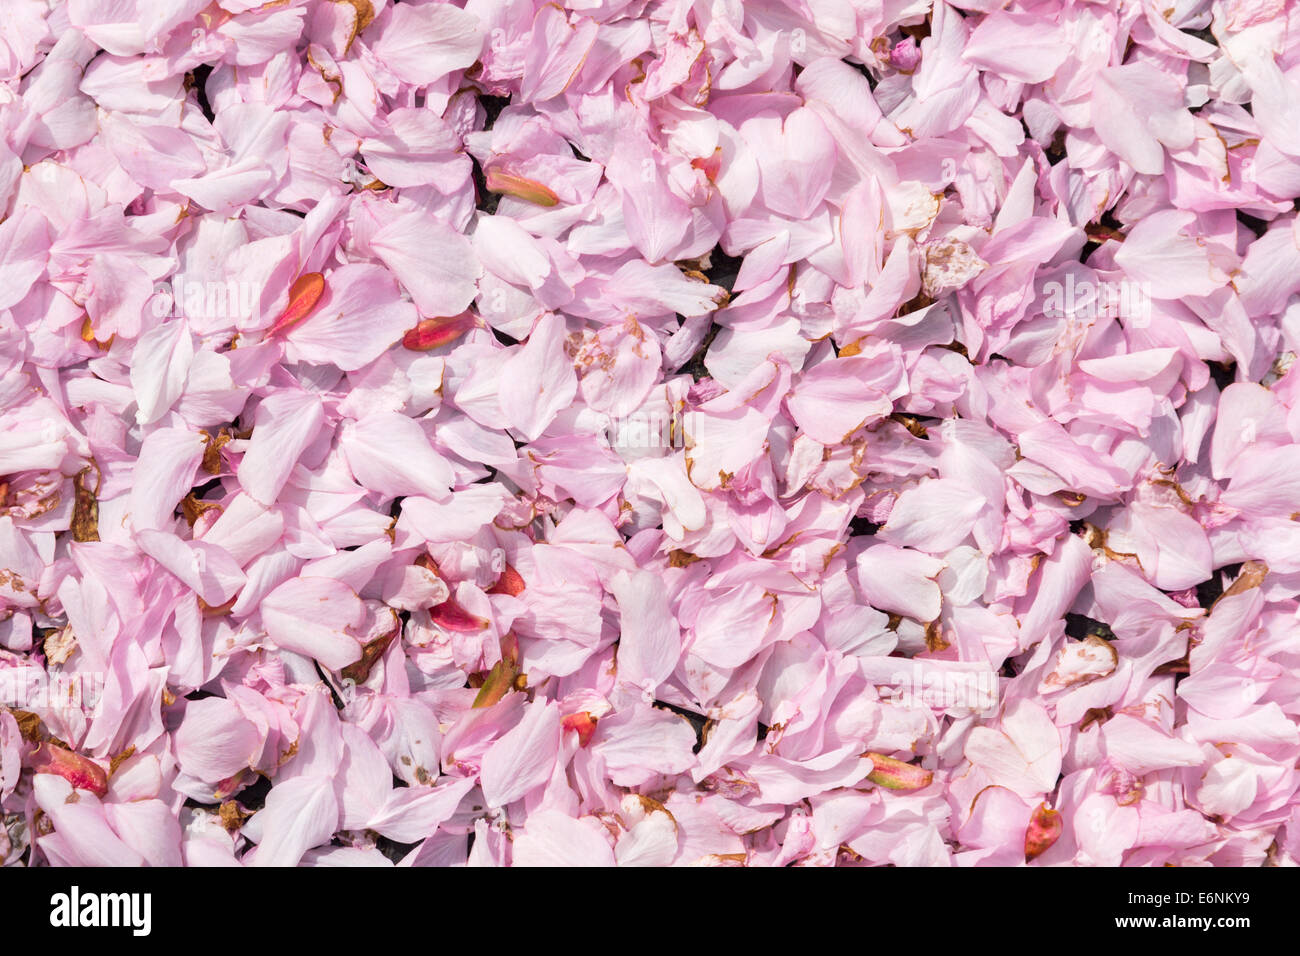 Carpet of fallen pink blossom which has fallen from a tree on to the surrounding ground. Stock Photo